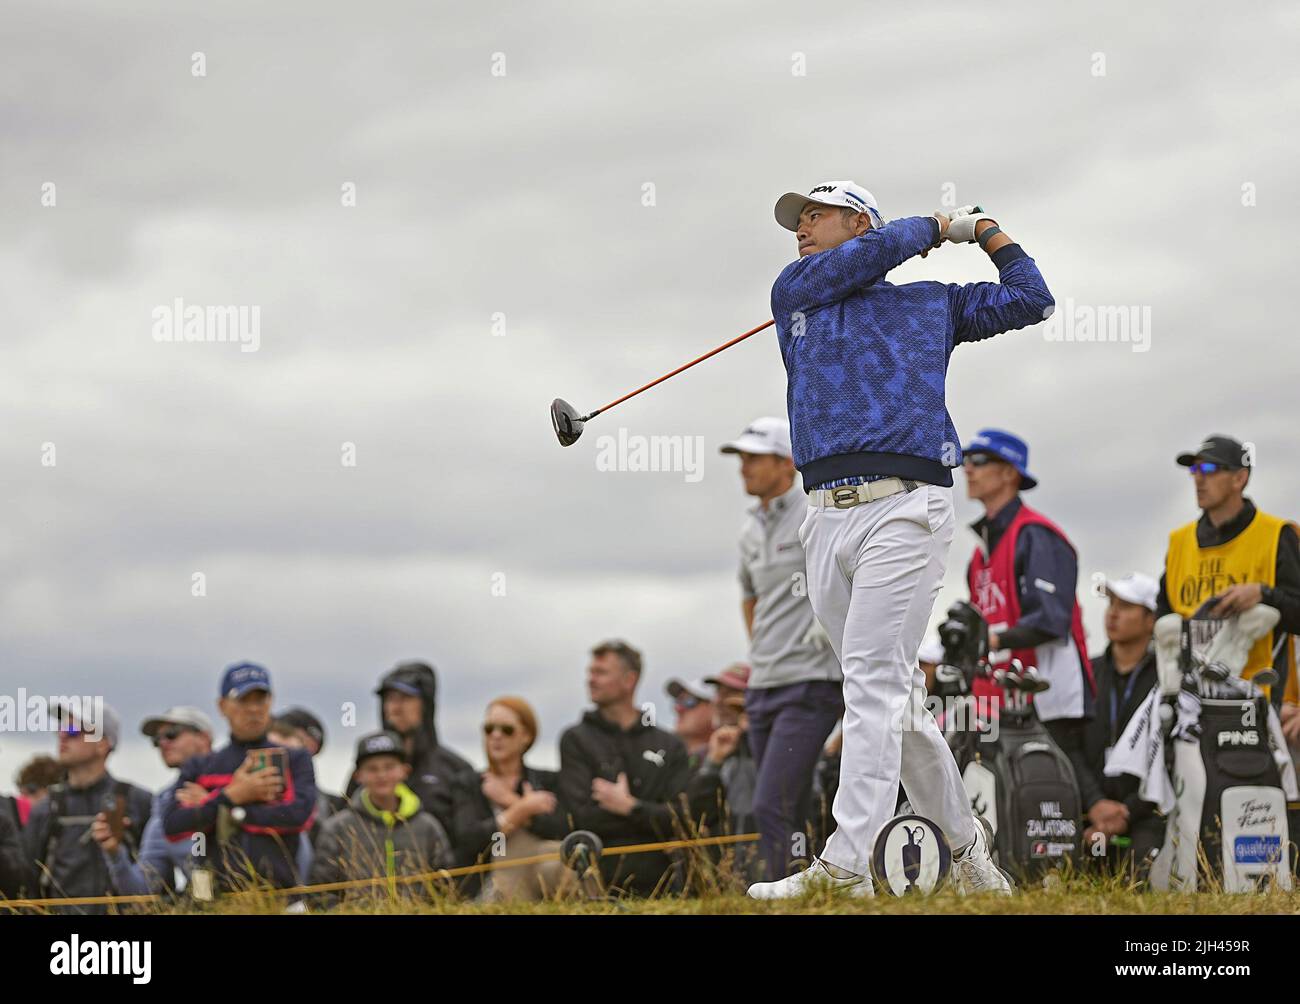 St Andrews, UK . 14th July, 2022. Hideki Matsuyama of Japan hits off the 14th tee during the first round of the British Open golf championship on July 14, 2022, at the Old Course in St. Andrews, Scotland. (Kyodo)==Kyodo Photo via Credit: Newscom/Alamy Live News Credit: Newscom/Alamy Live News Stock Photo